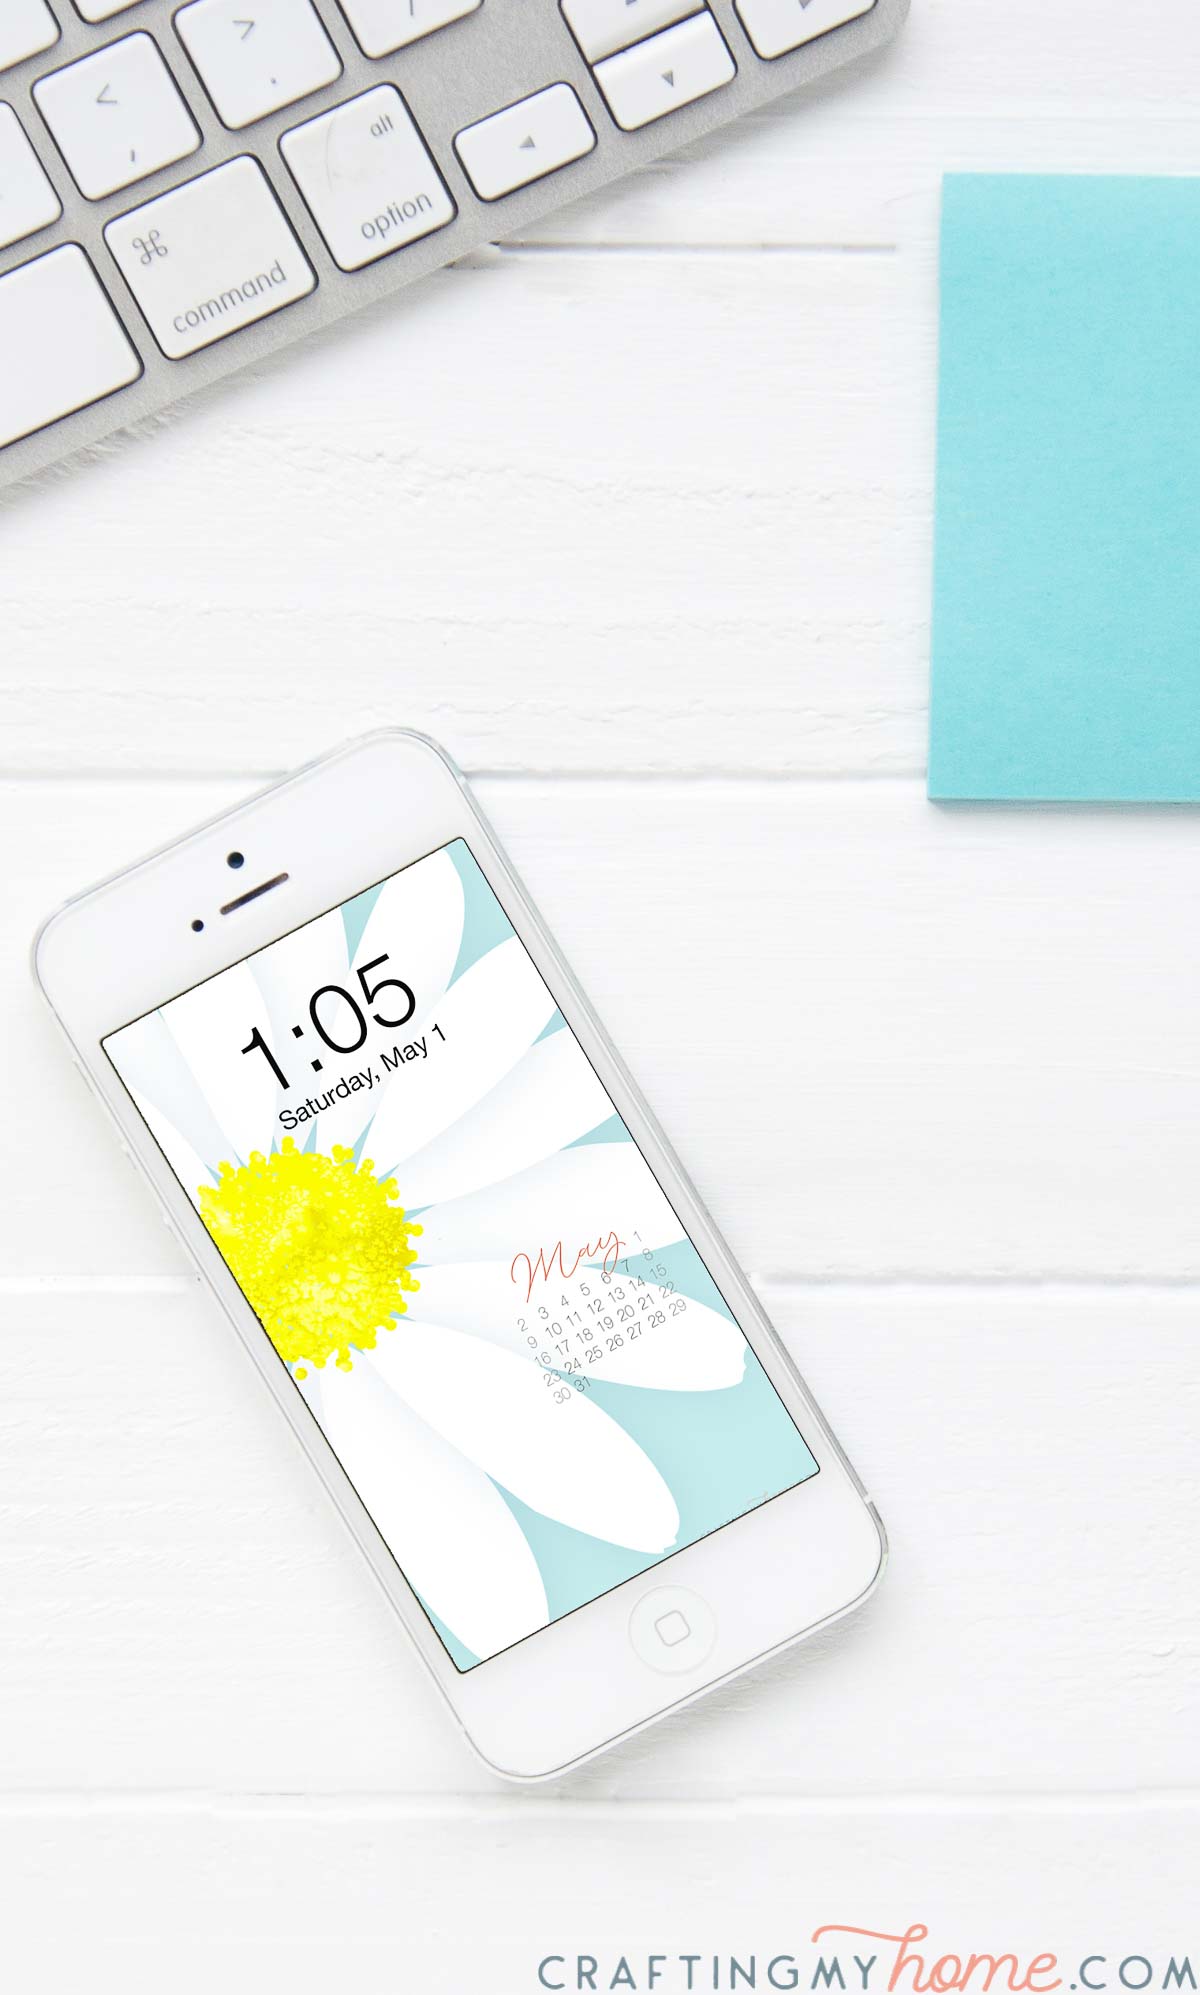 Free digital background for May on the screen of a white iPhone on a desk next to a keyboard and blue post-it notes. 